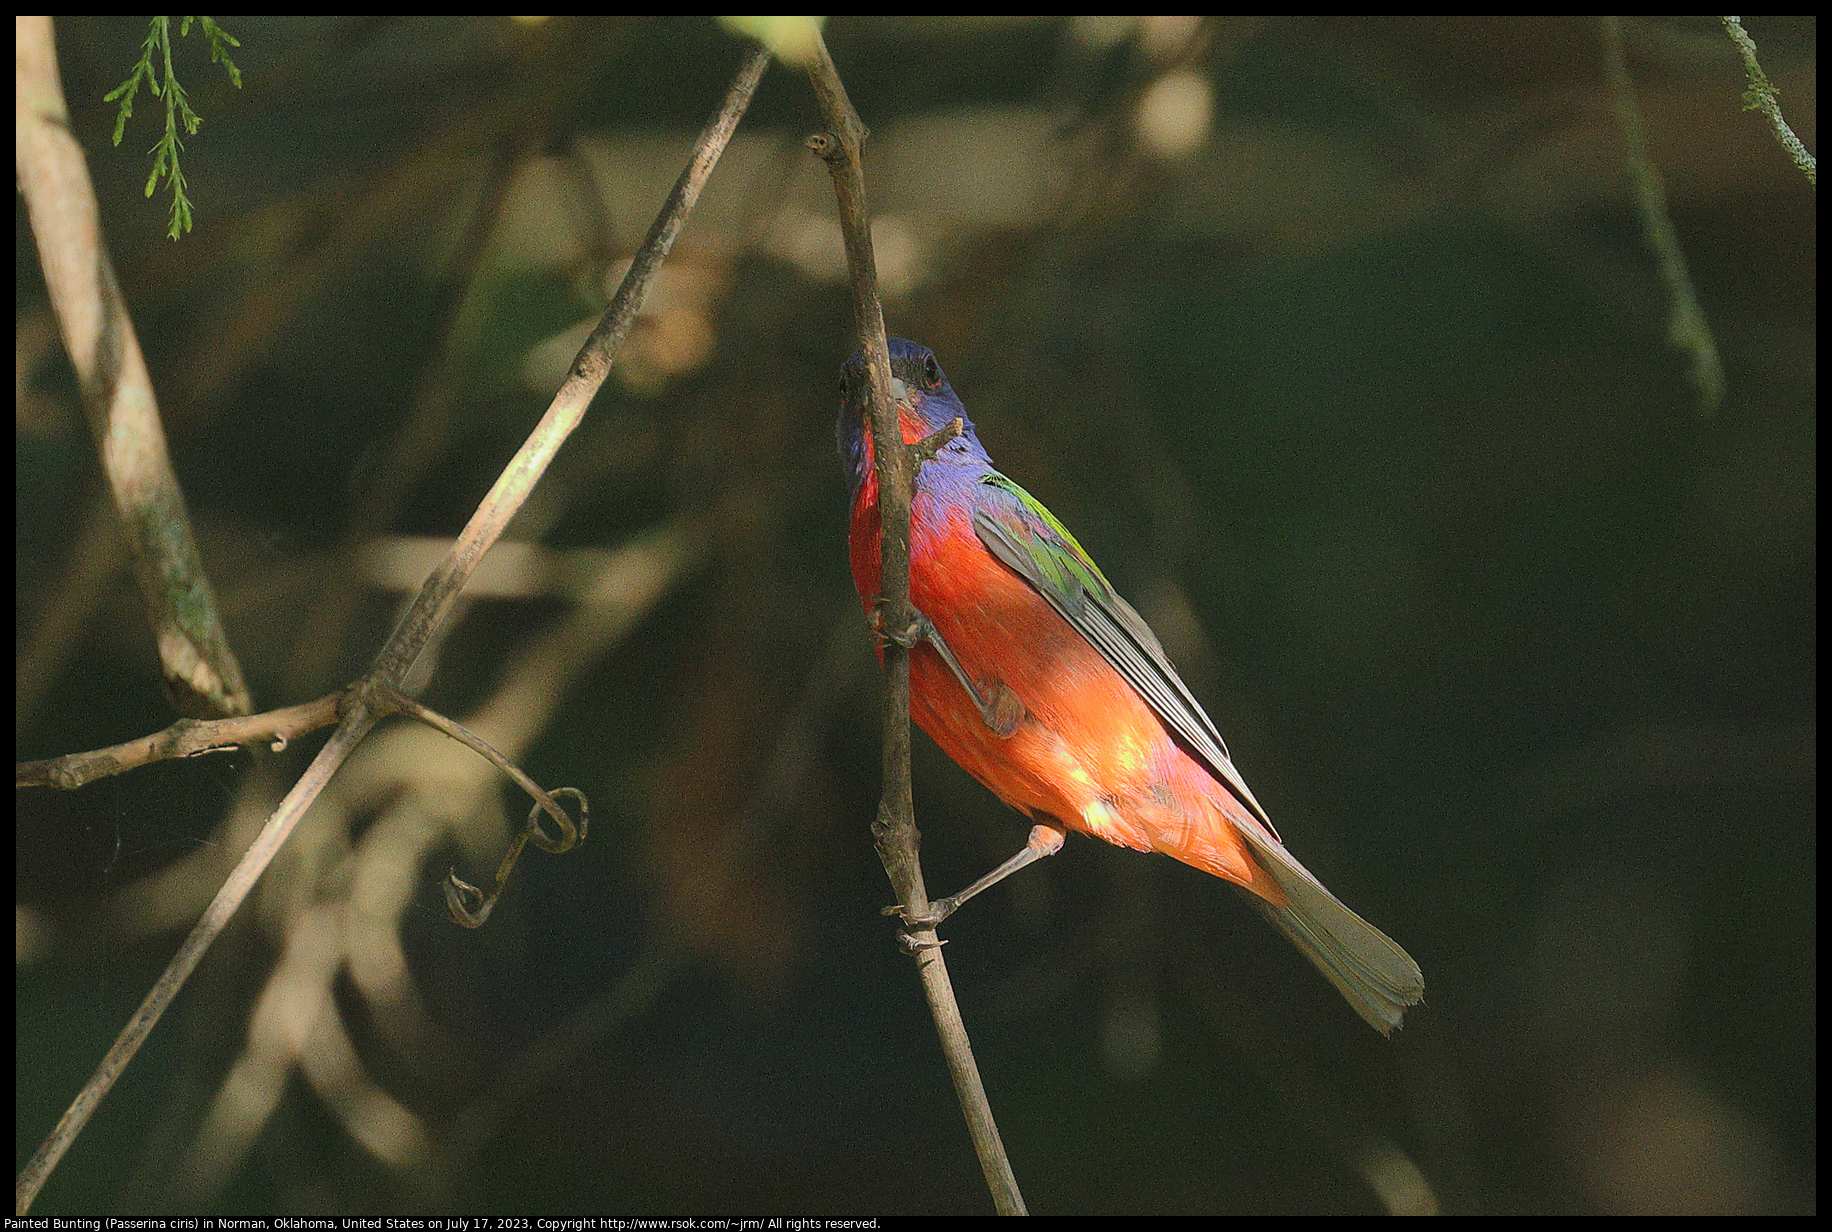 Male Painted Bunting (Passerina ciris) in Norman, Oklahoma, United States on July 17, 2023